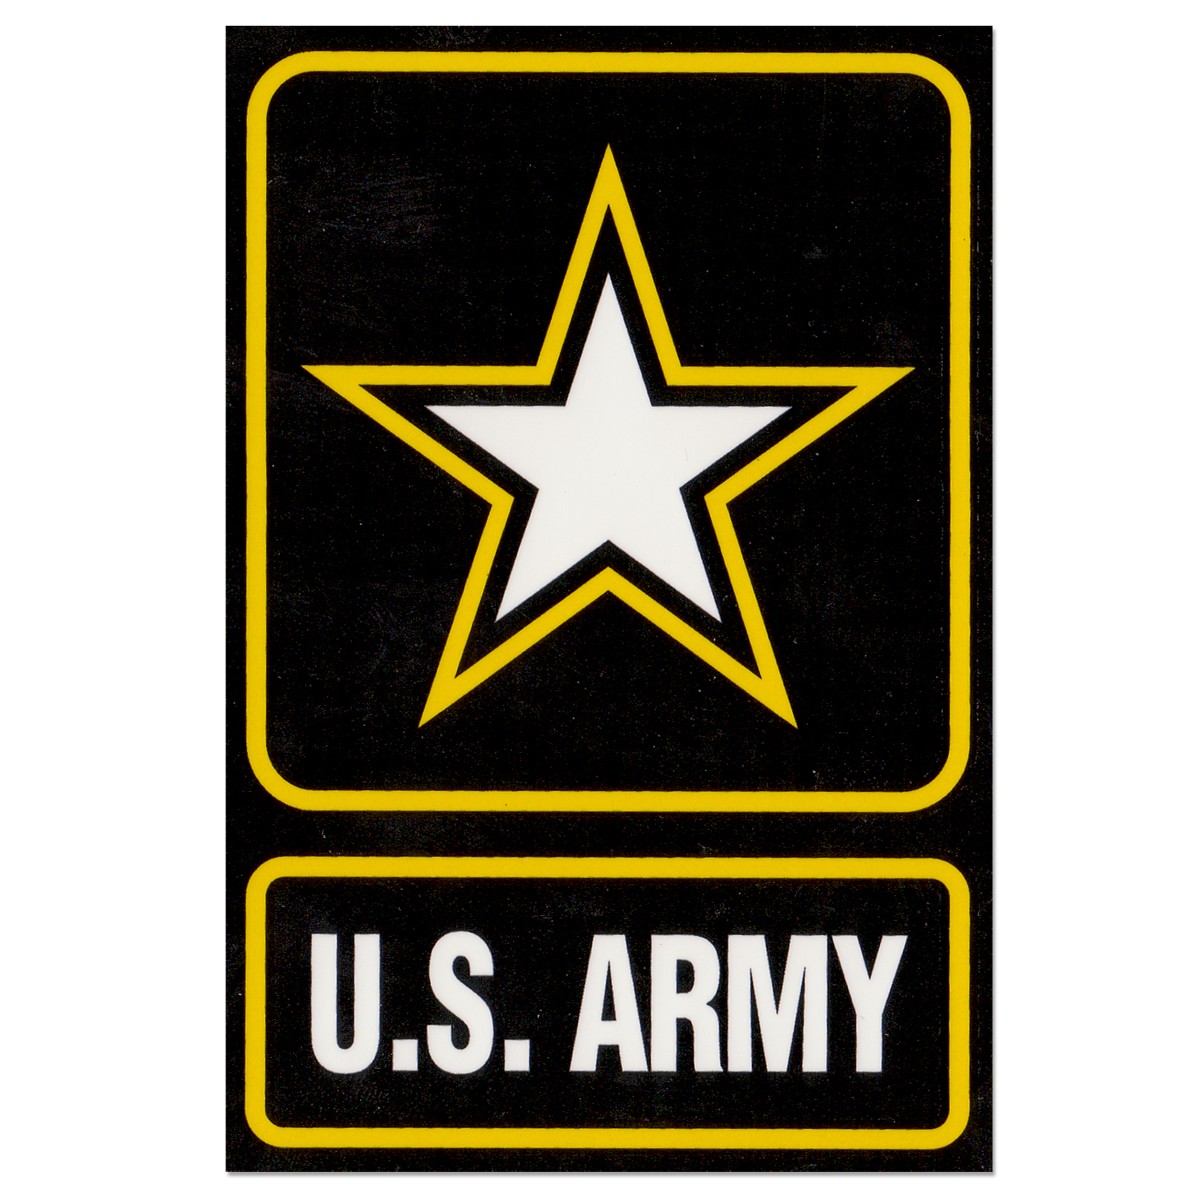 Us Army Logo 7733 Hd Wallpapers in Logos   Imagescicom 1200x1200